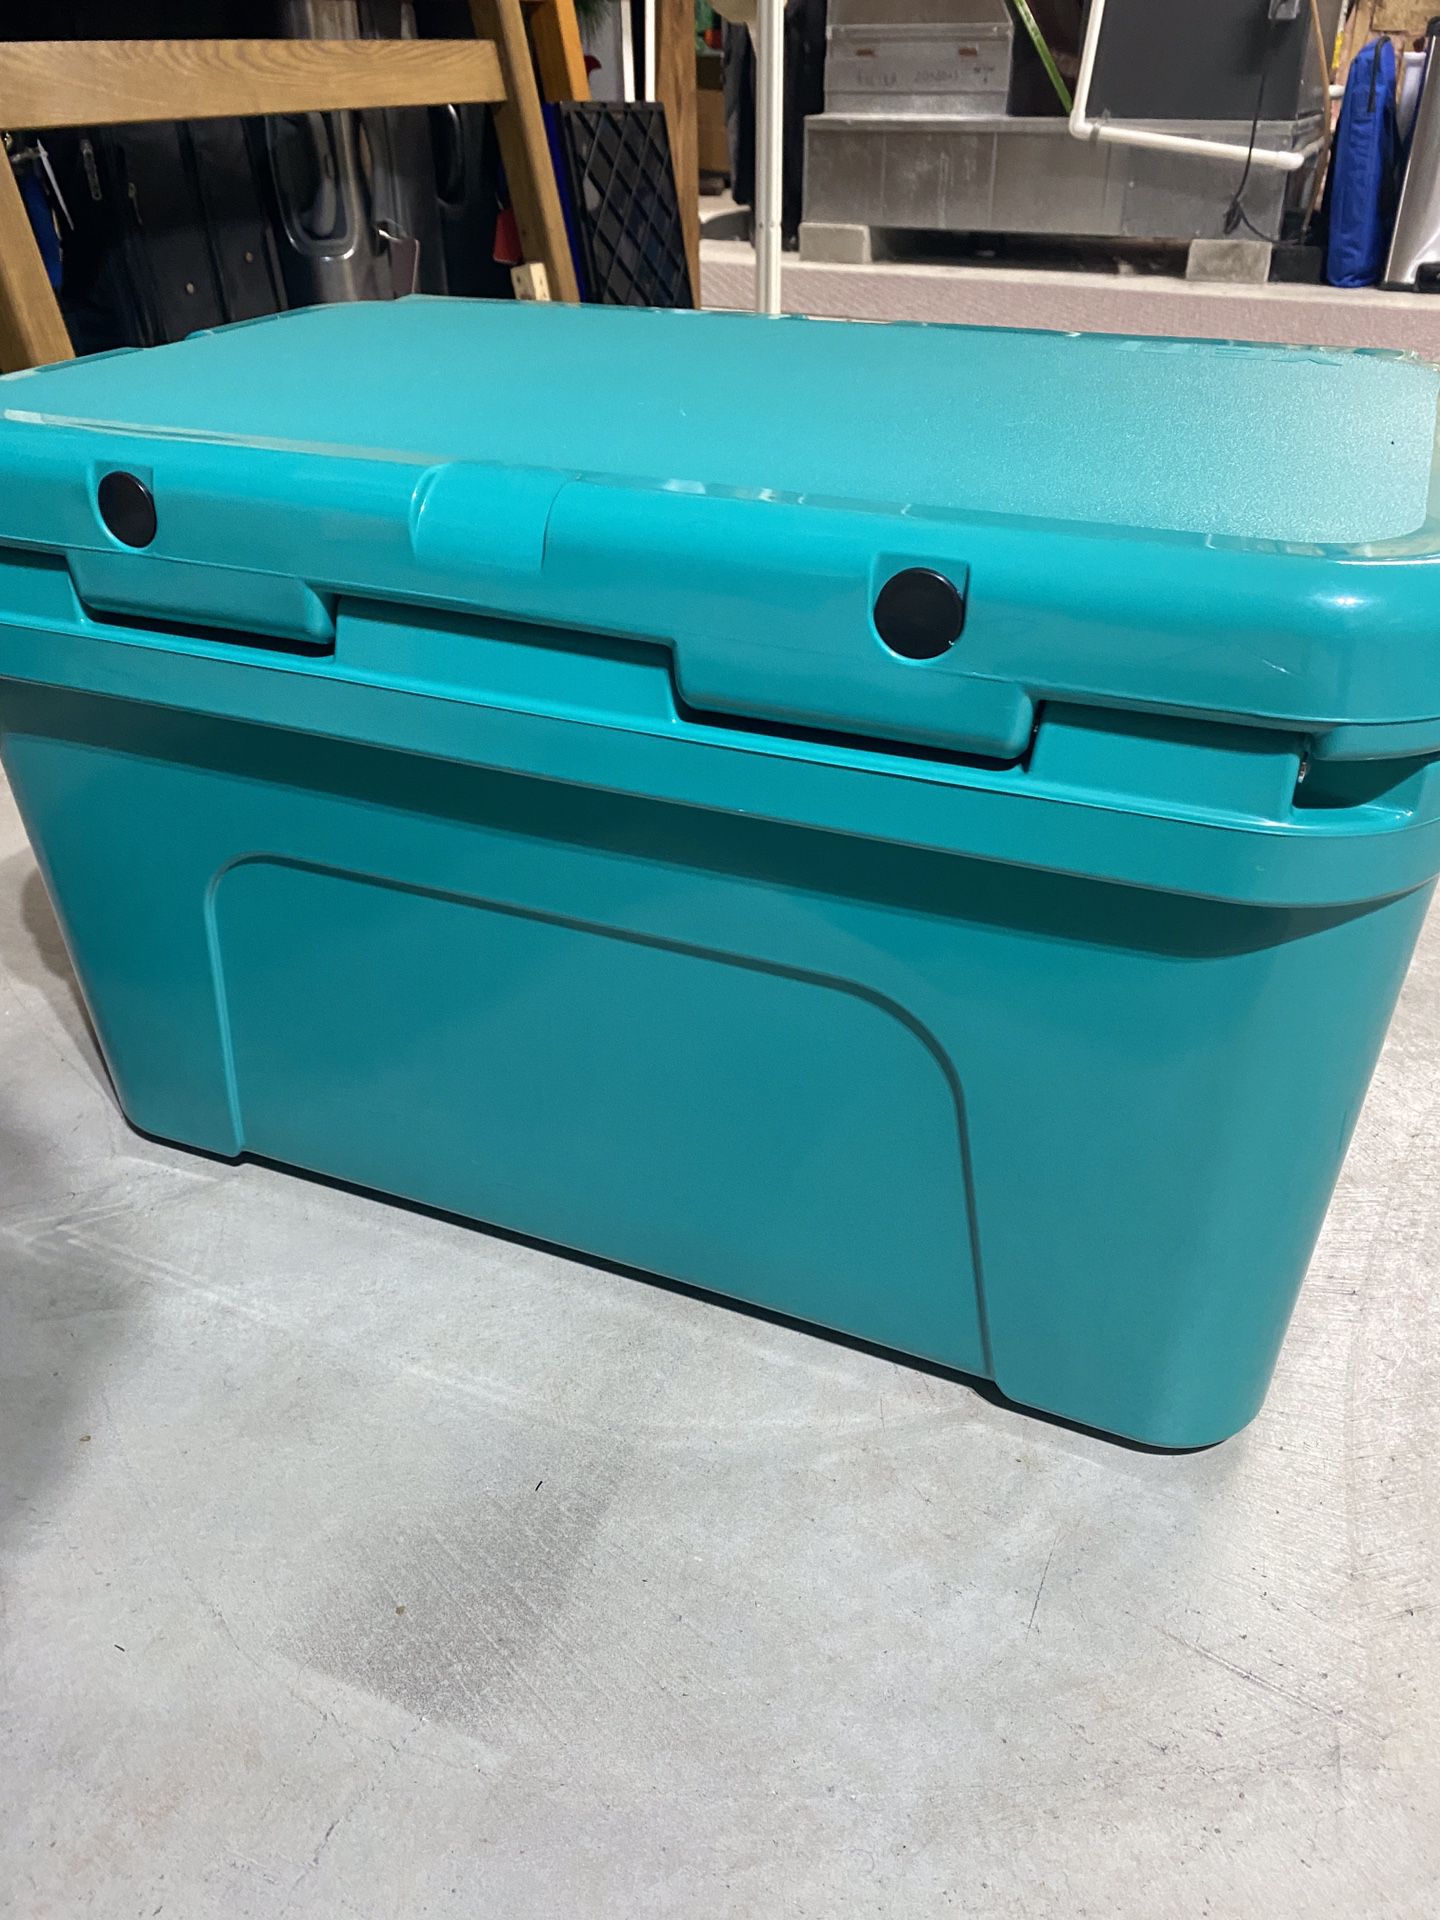 Yeti Tundra 45 Reef Blue for Sale in Whitsett, NC - OfferUp